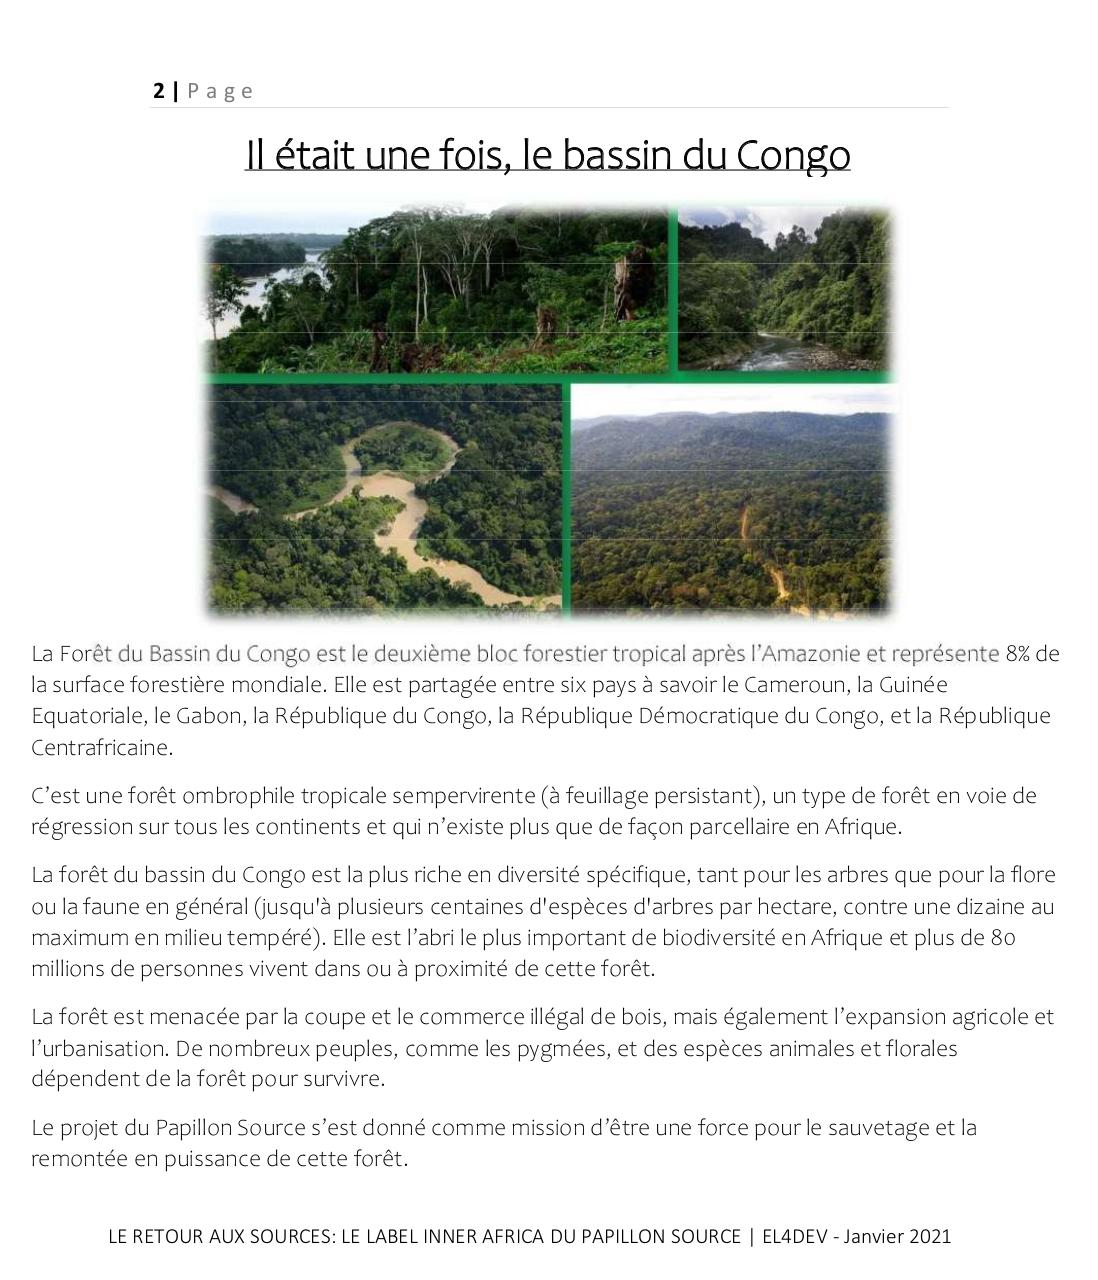 LE PAPILLON SOURCE INNER AFRICA.pdf - page 3/10